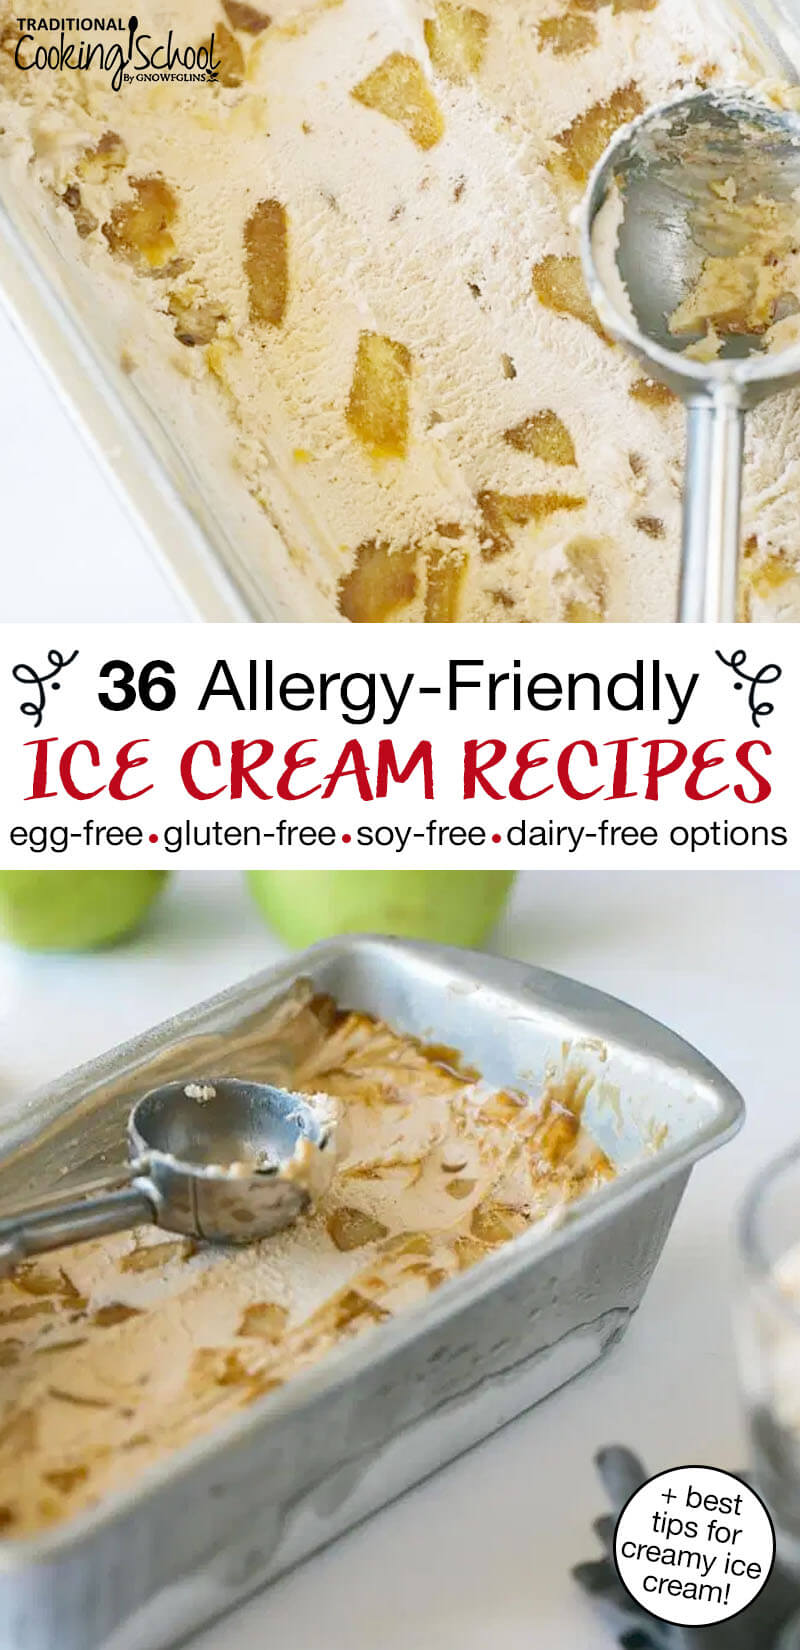 photo collage of brightly colored bowls of ice cream, with text overlay: "36 Allergy-Friendly Ice Cream Recipes (egg-free, gluten-free, soy-free, dairy-free options) (+best tips for creamy ice cream!)"